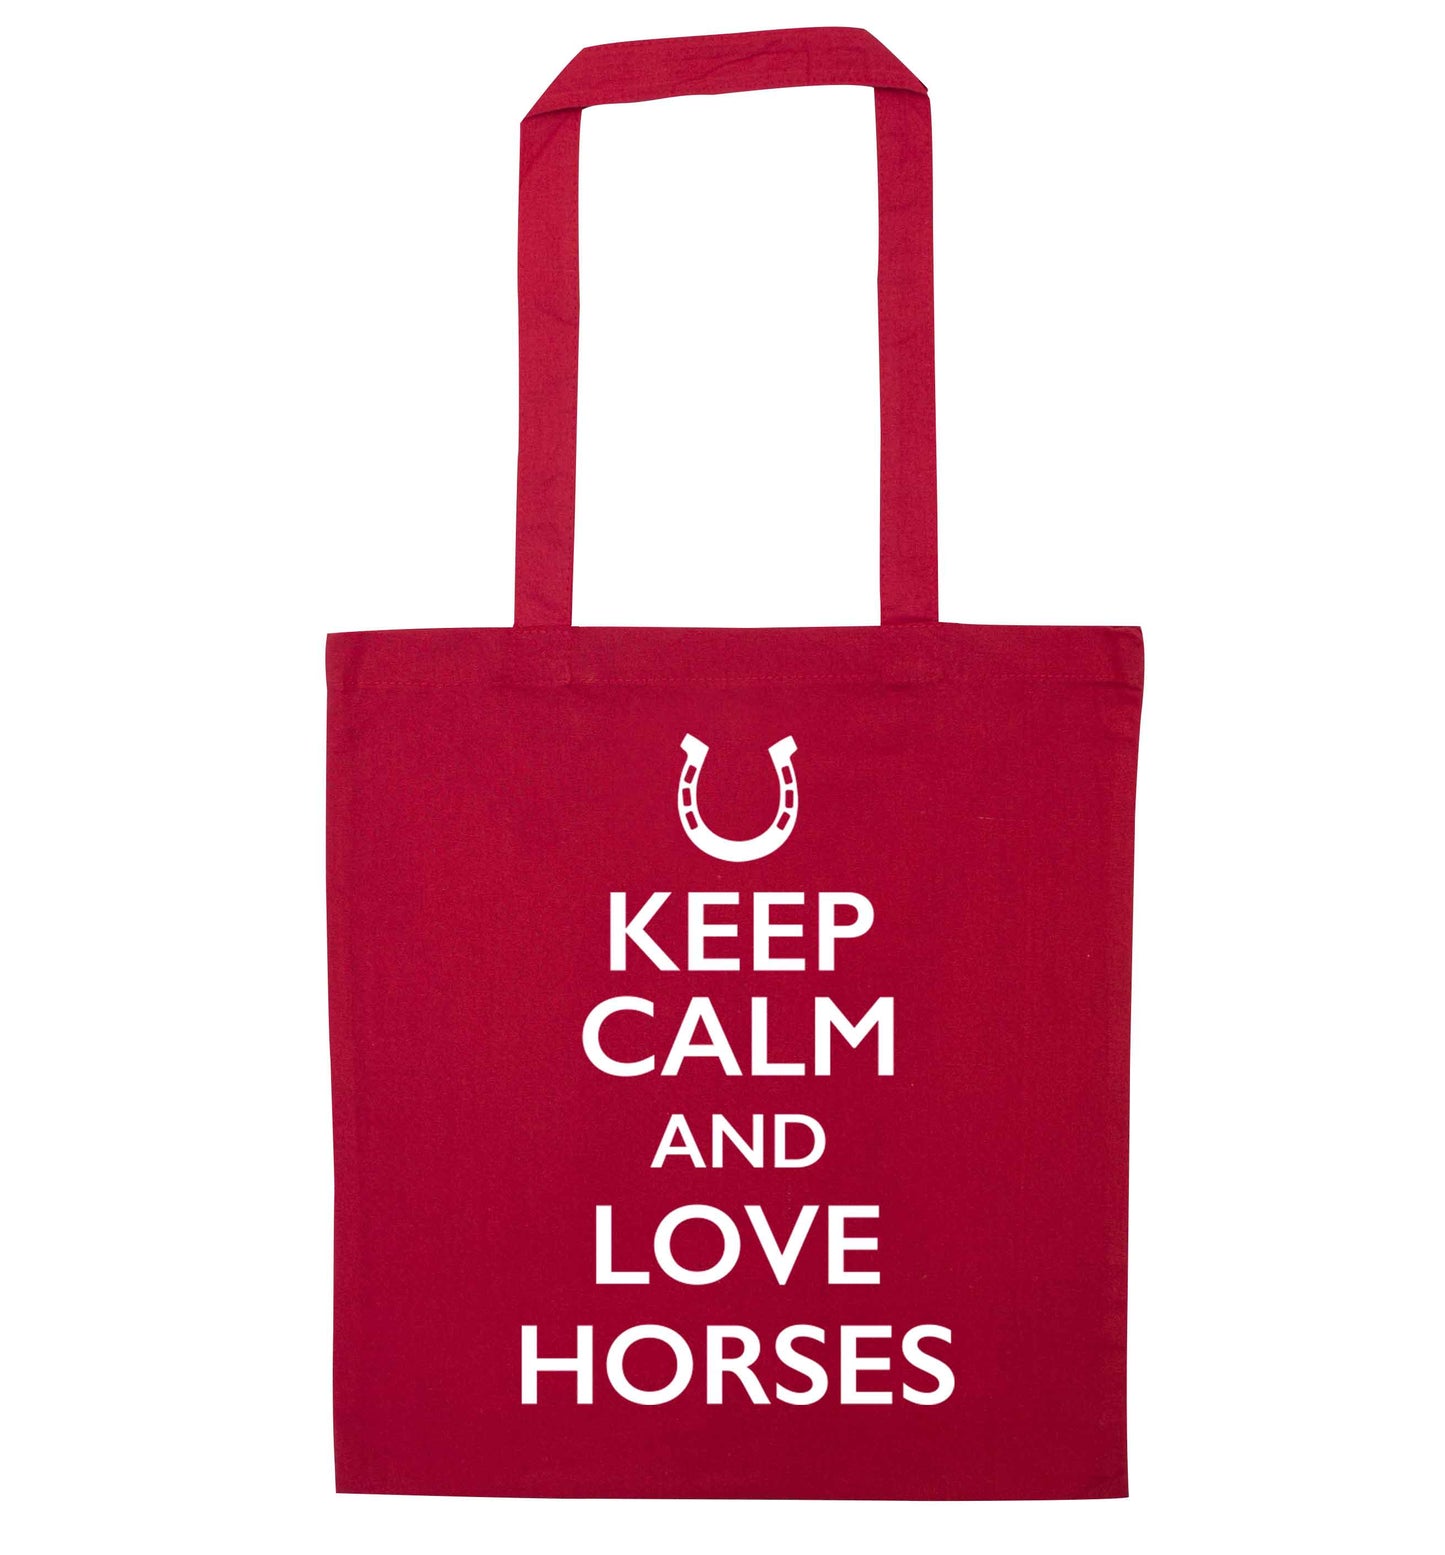 Keep calm and love horses red tote bag